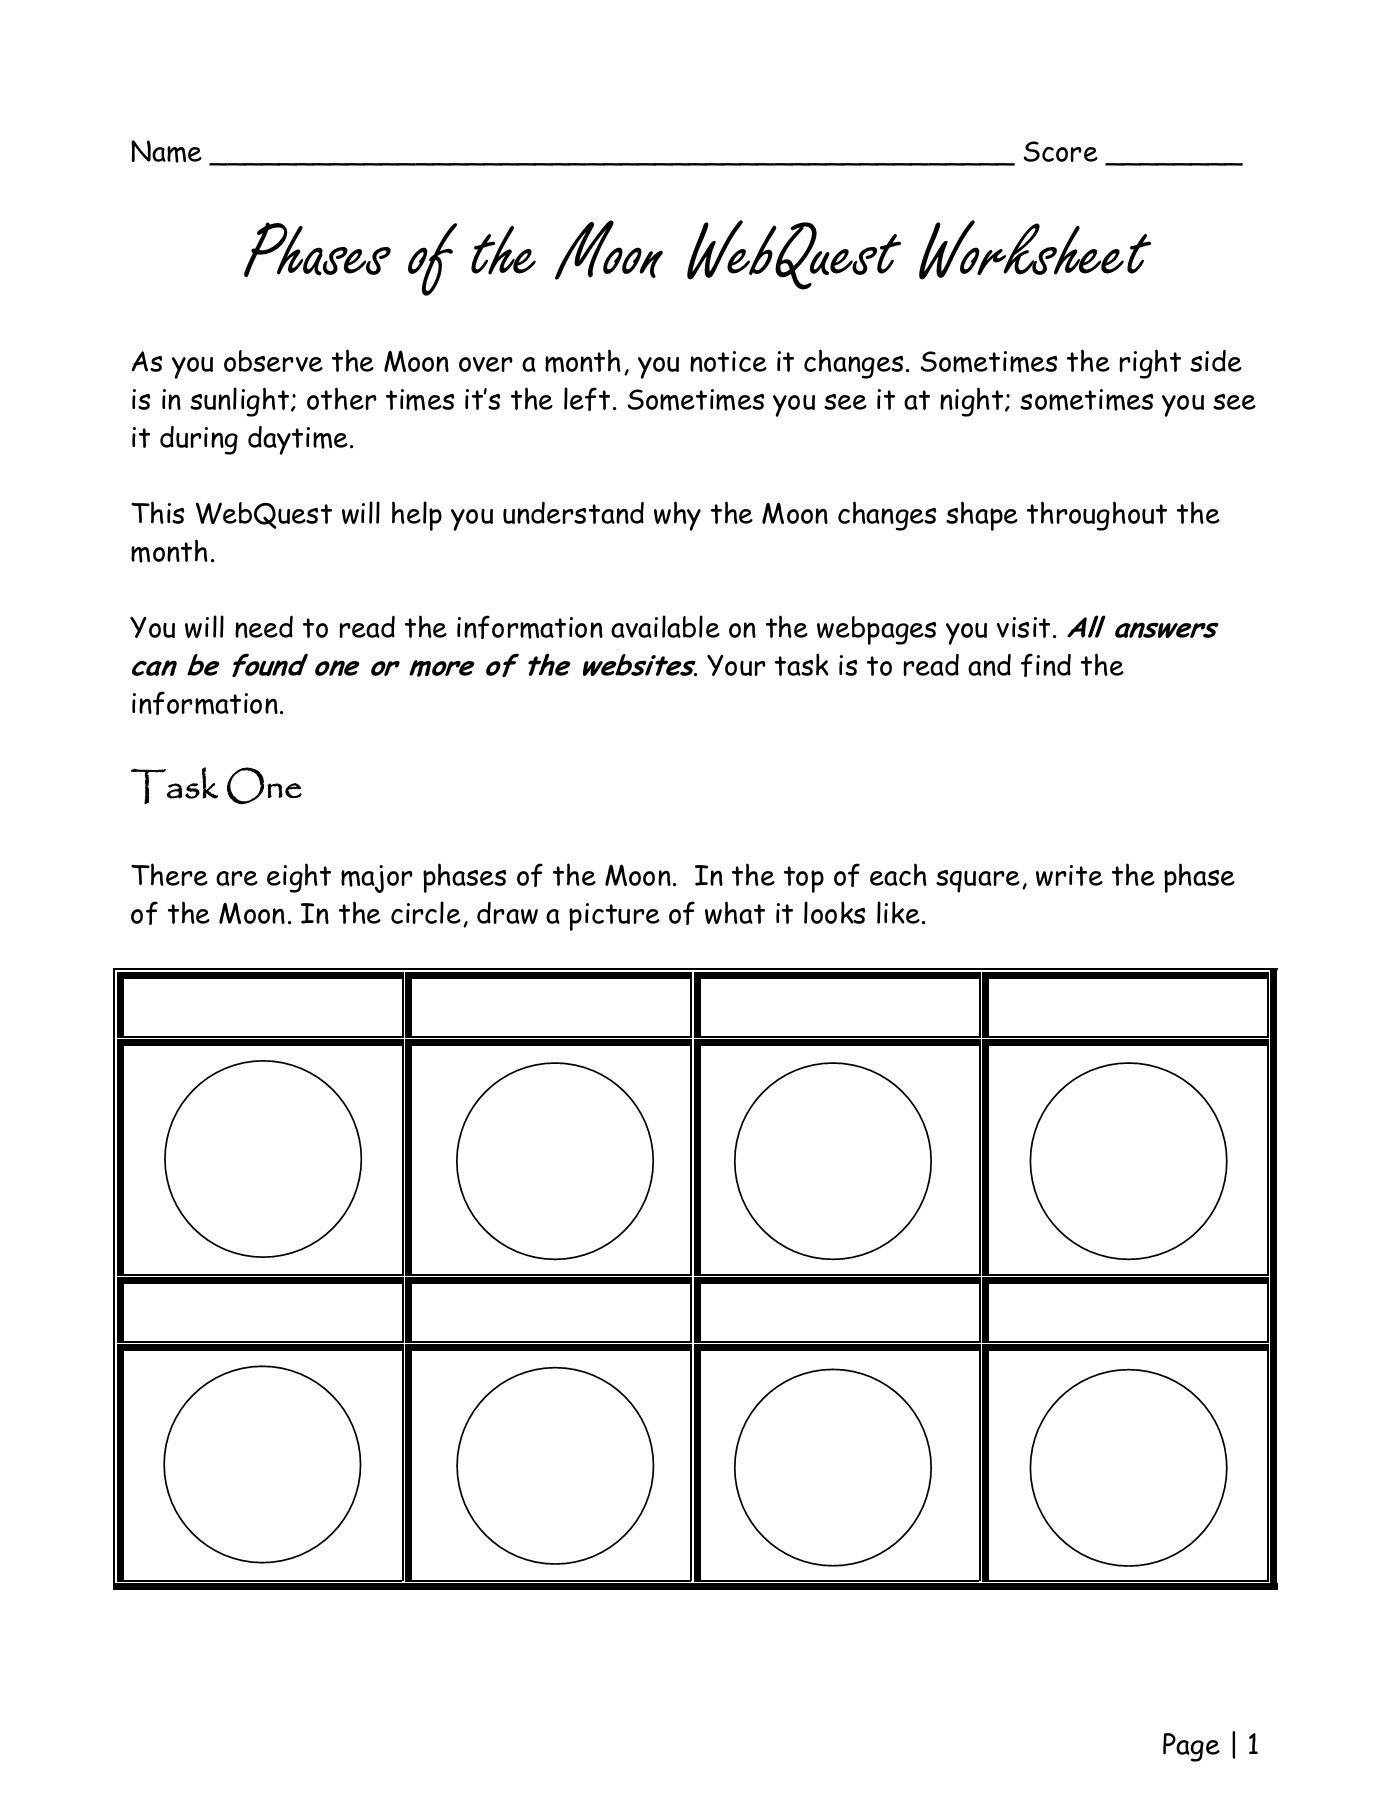 Phases Of The Moon Webquest Worksheet  Wiley3Rdgrade Pages 1  6 As Well As Moon Phases Worksheet Answers